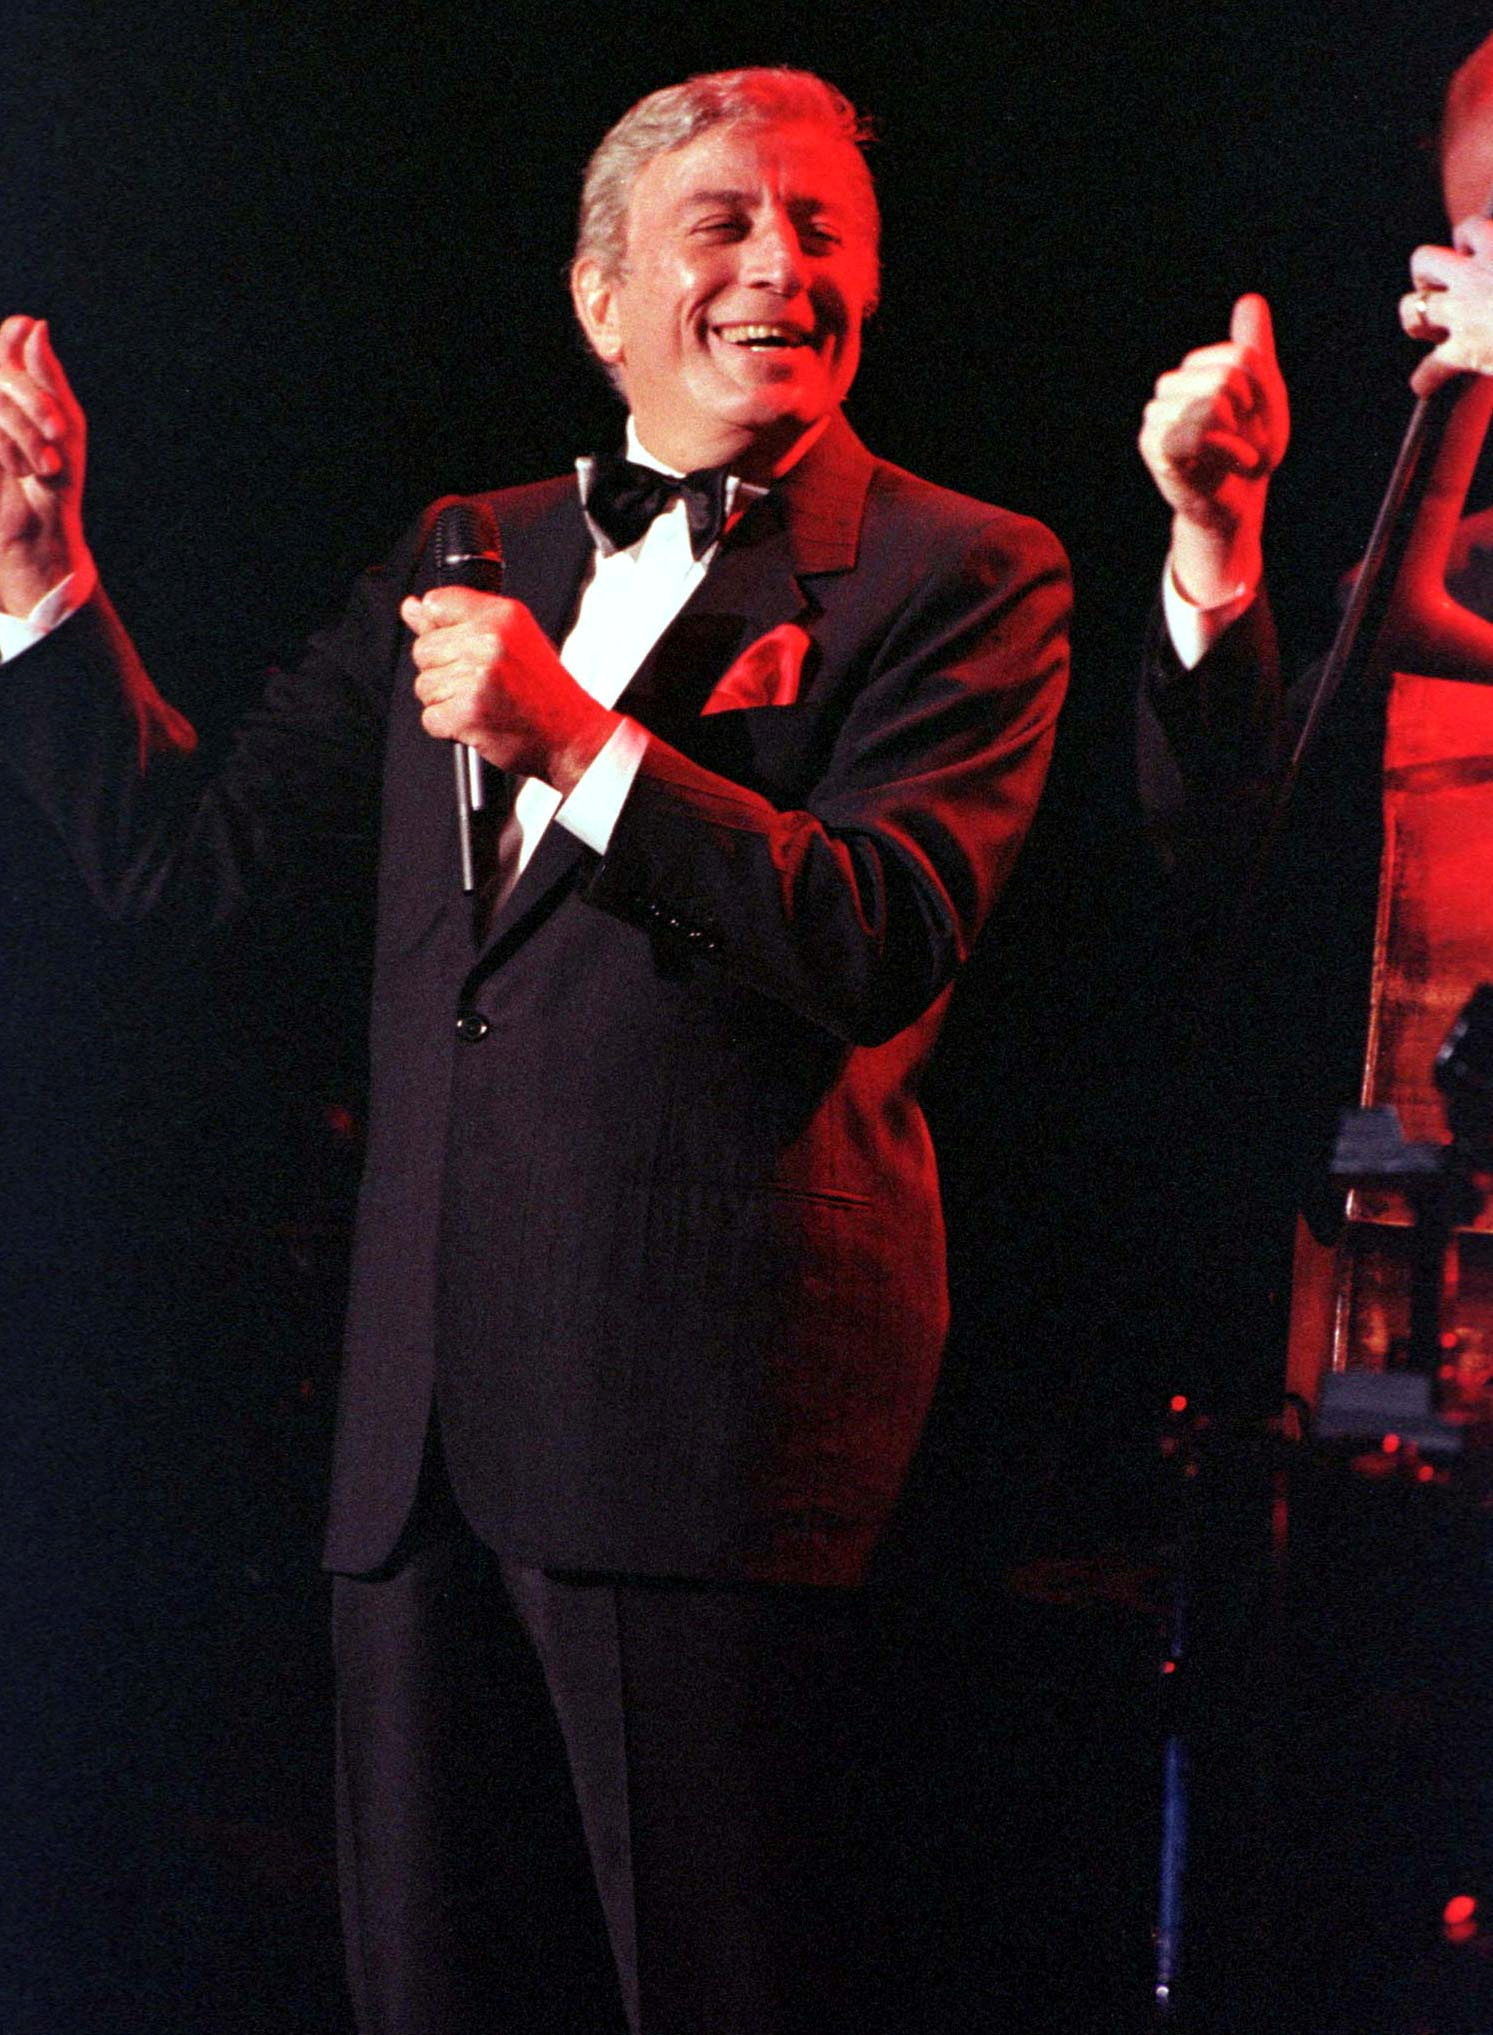 Quotes by and about singer Tony Bennett | Reuters